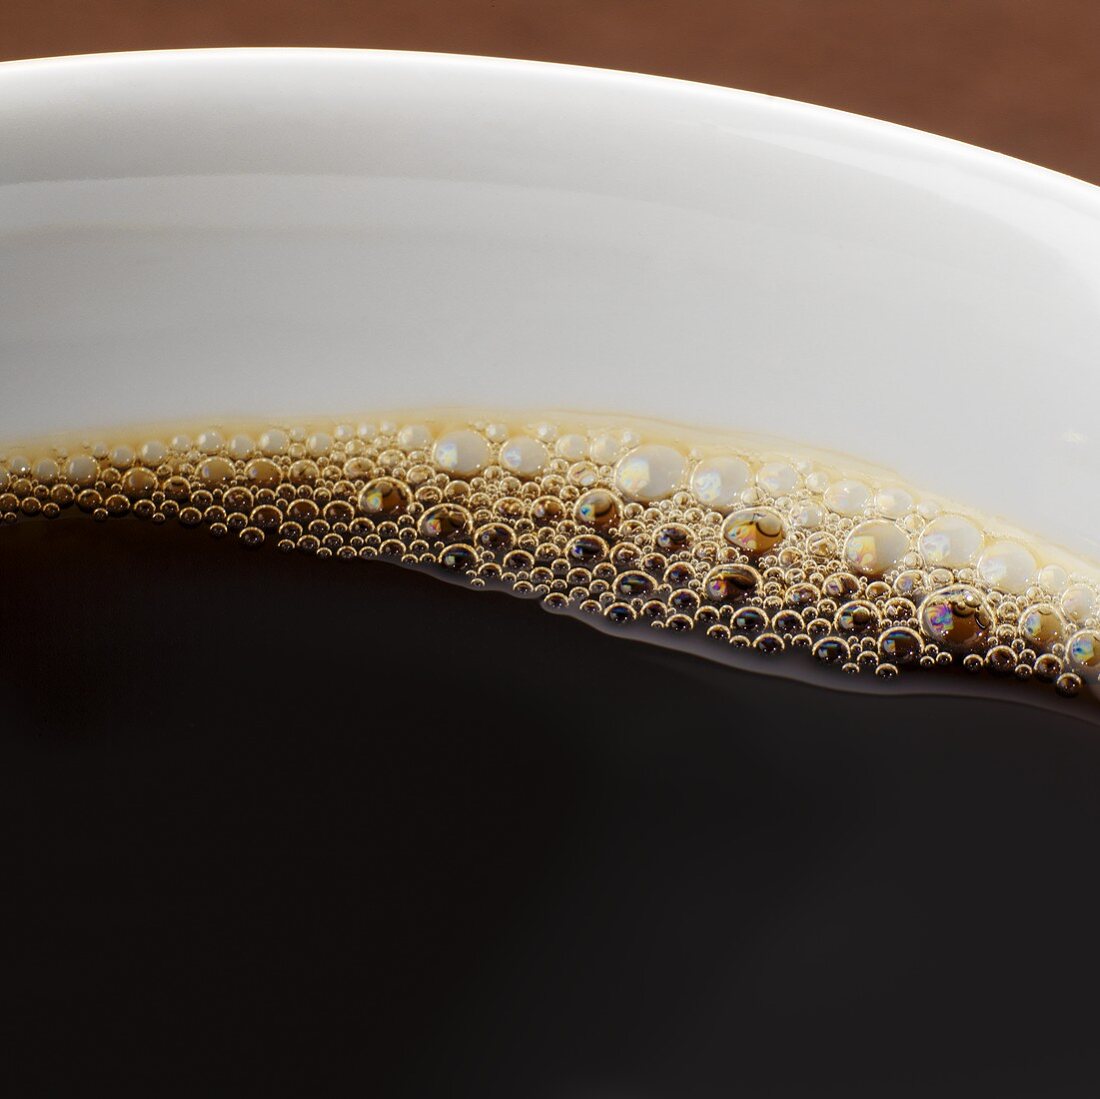 Black coffee in cup (close-up)